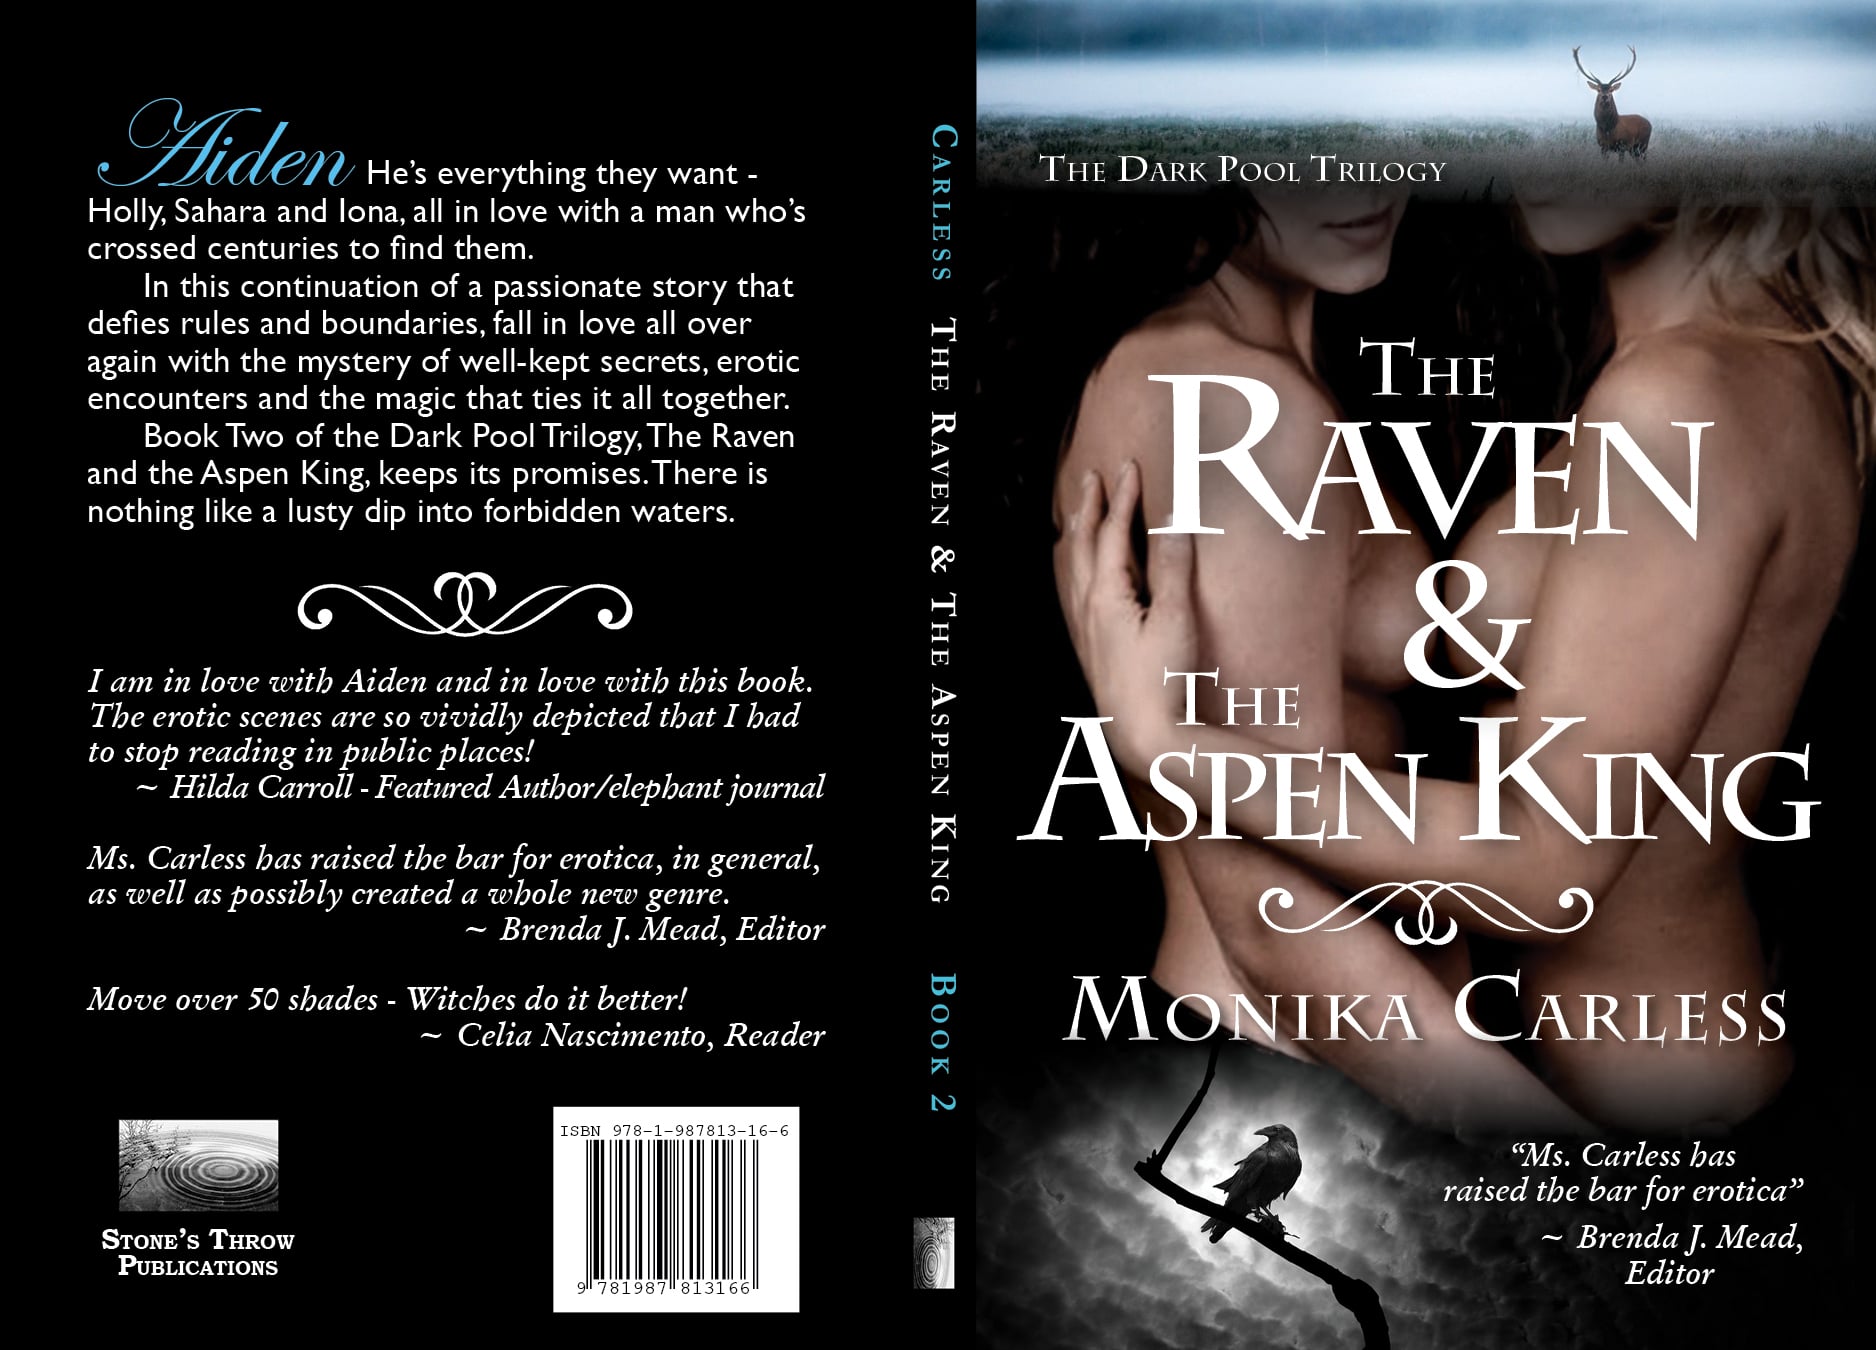 2017-02-03-carless-the-raven-final-kindle